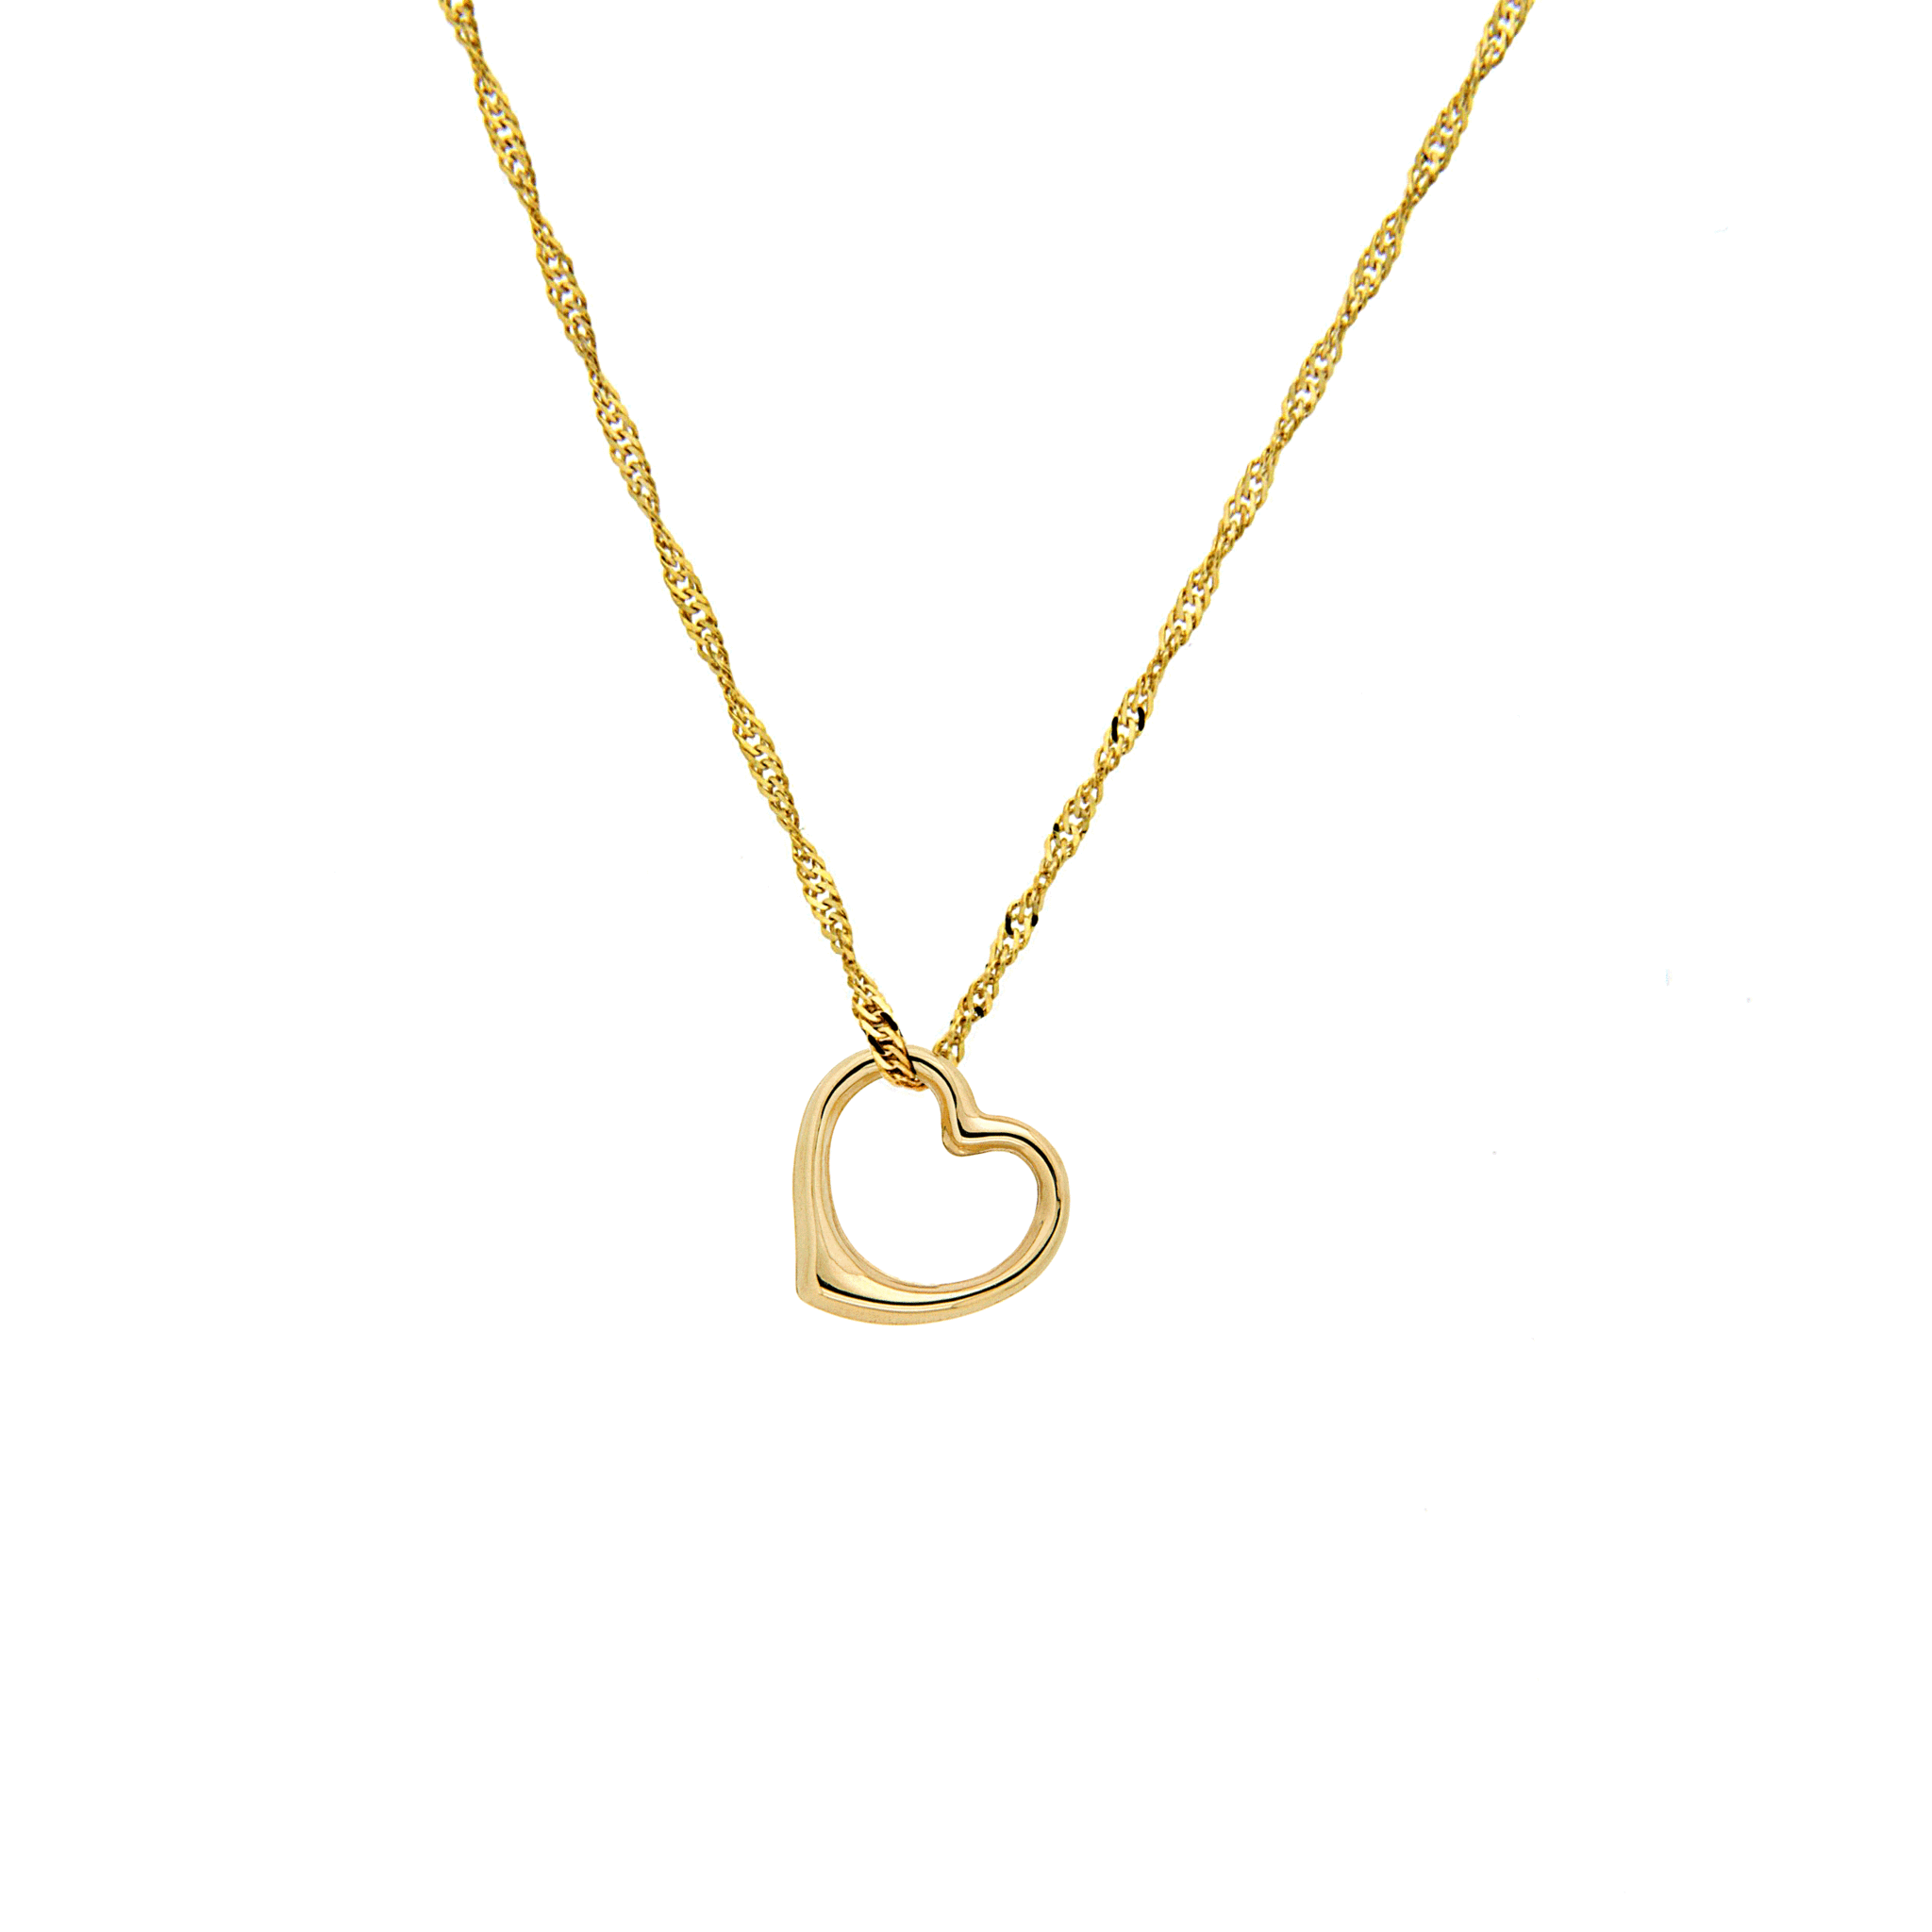 Necklaces - Yellow Gold Floating Heart Necklace was sold for R799.00 on ...